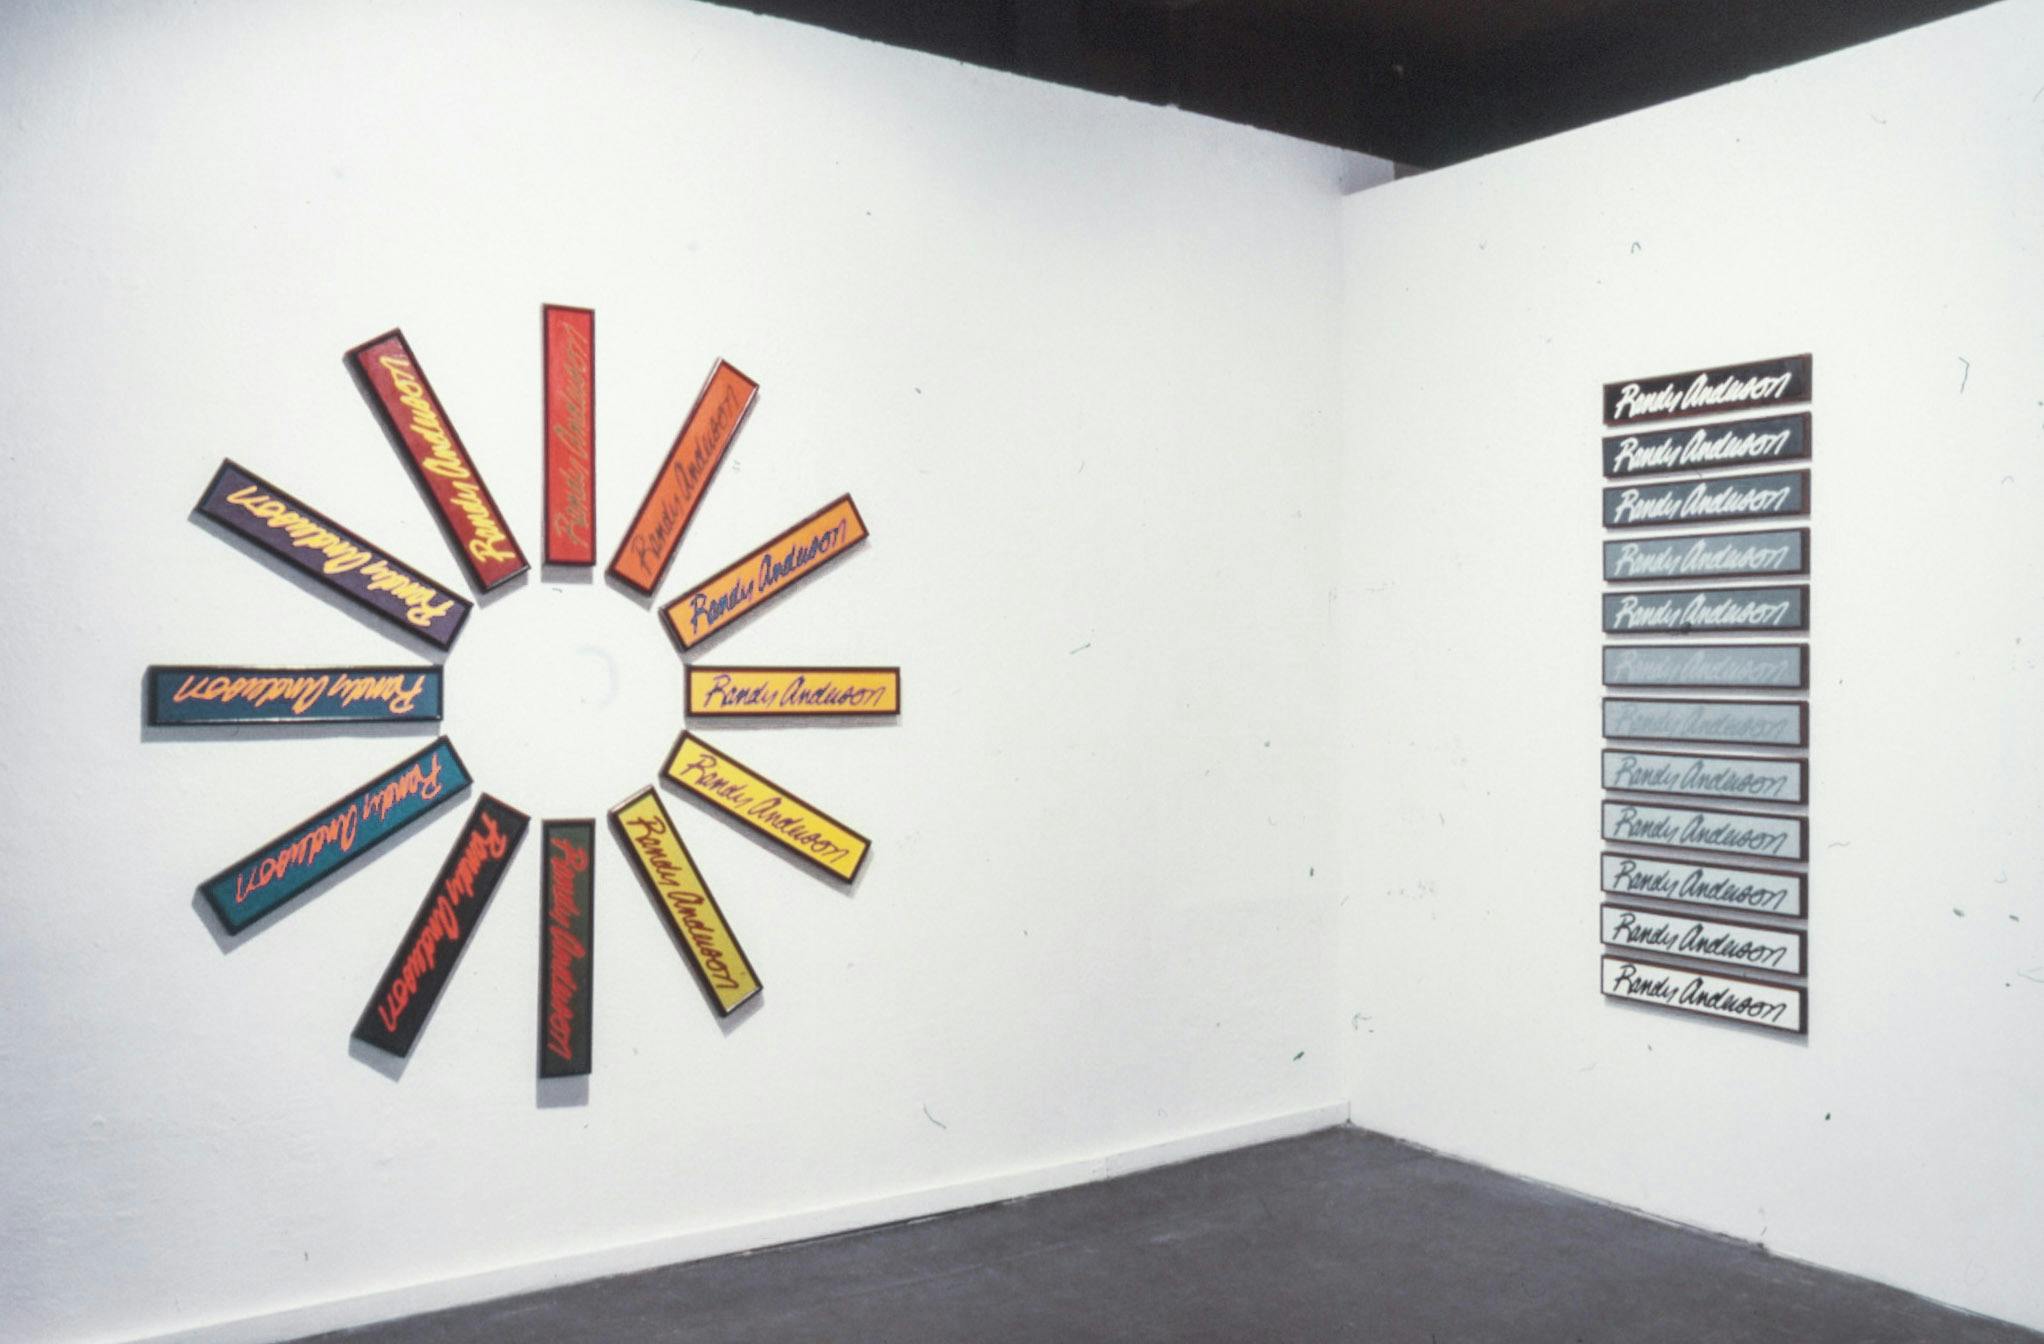 Two artworks made of plaques reading "Randy Anderson” hang on a gallery wall. One  is arranged in a wheel with colourful plaques, the other has plaques in a column going from black to white.